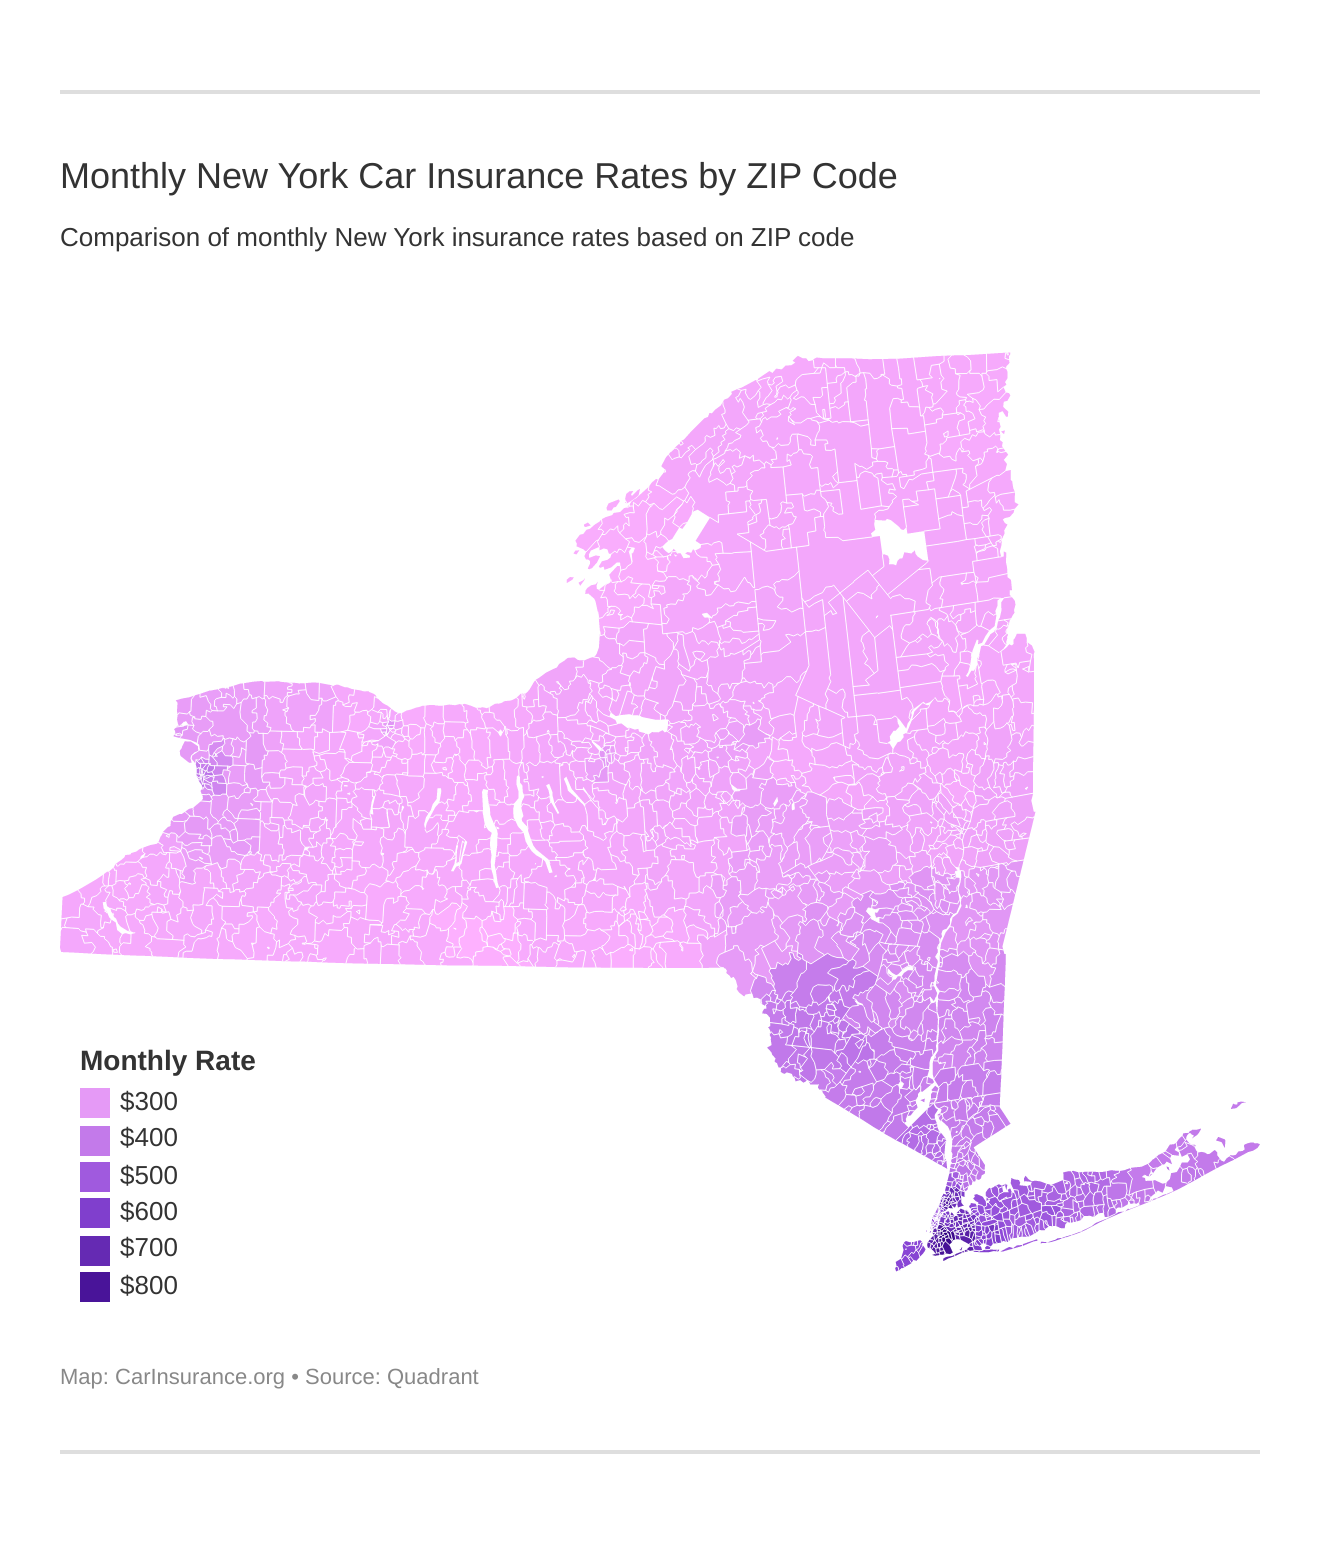 Monthly New York Car Insurance Rates by ZIP Code